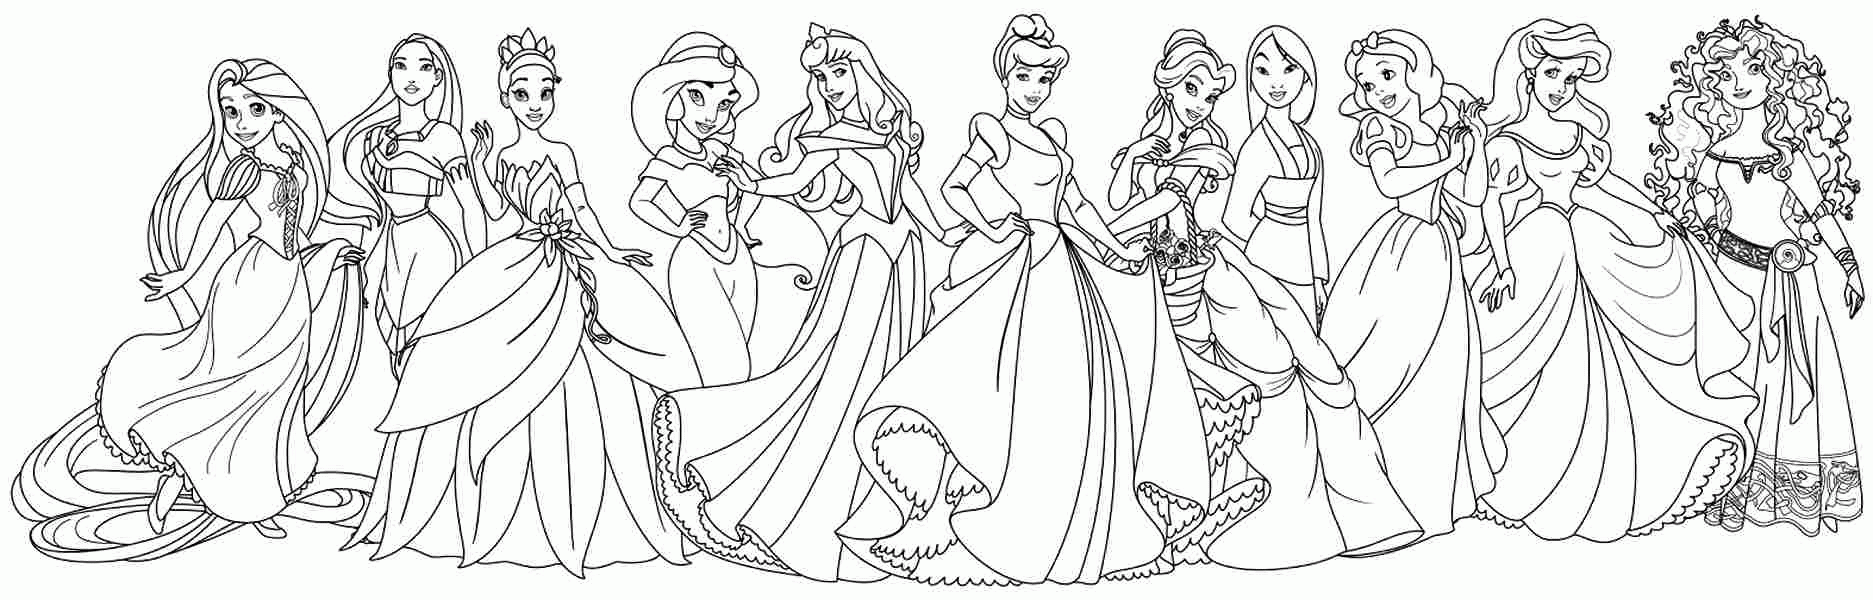 Free Printable Coloring Pages Disney Princesses   Coloring Page ...